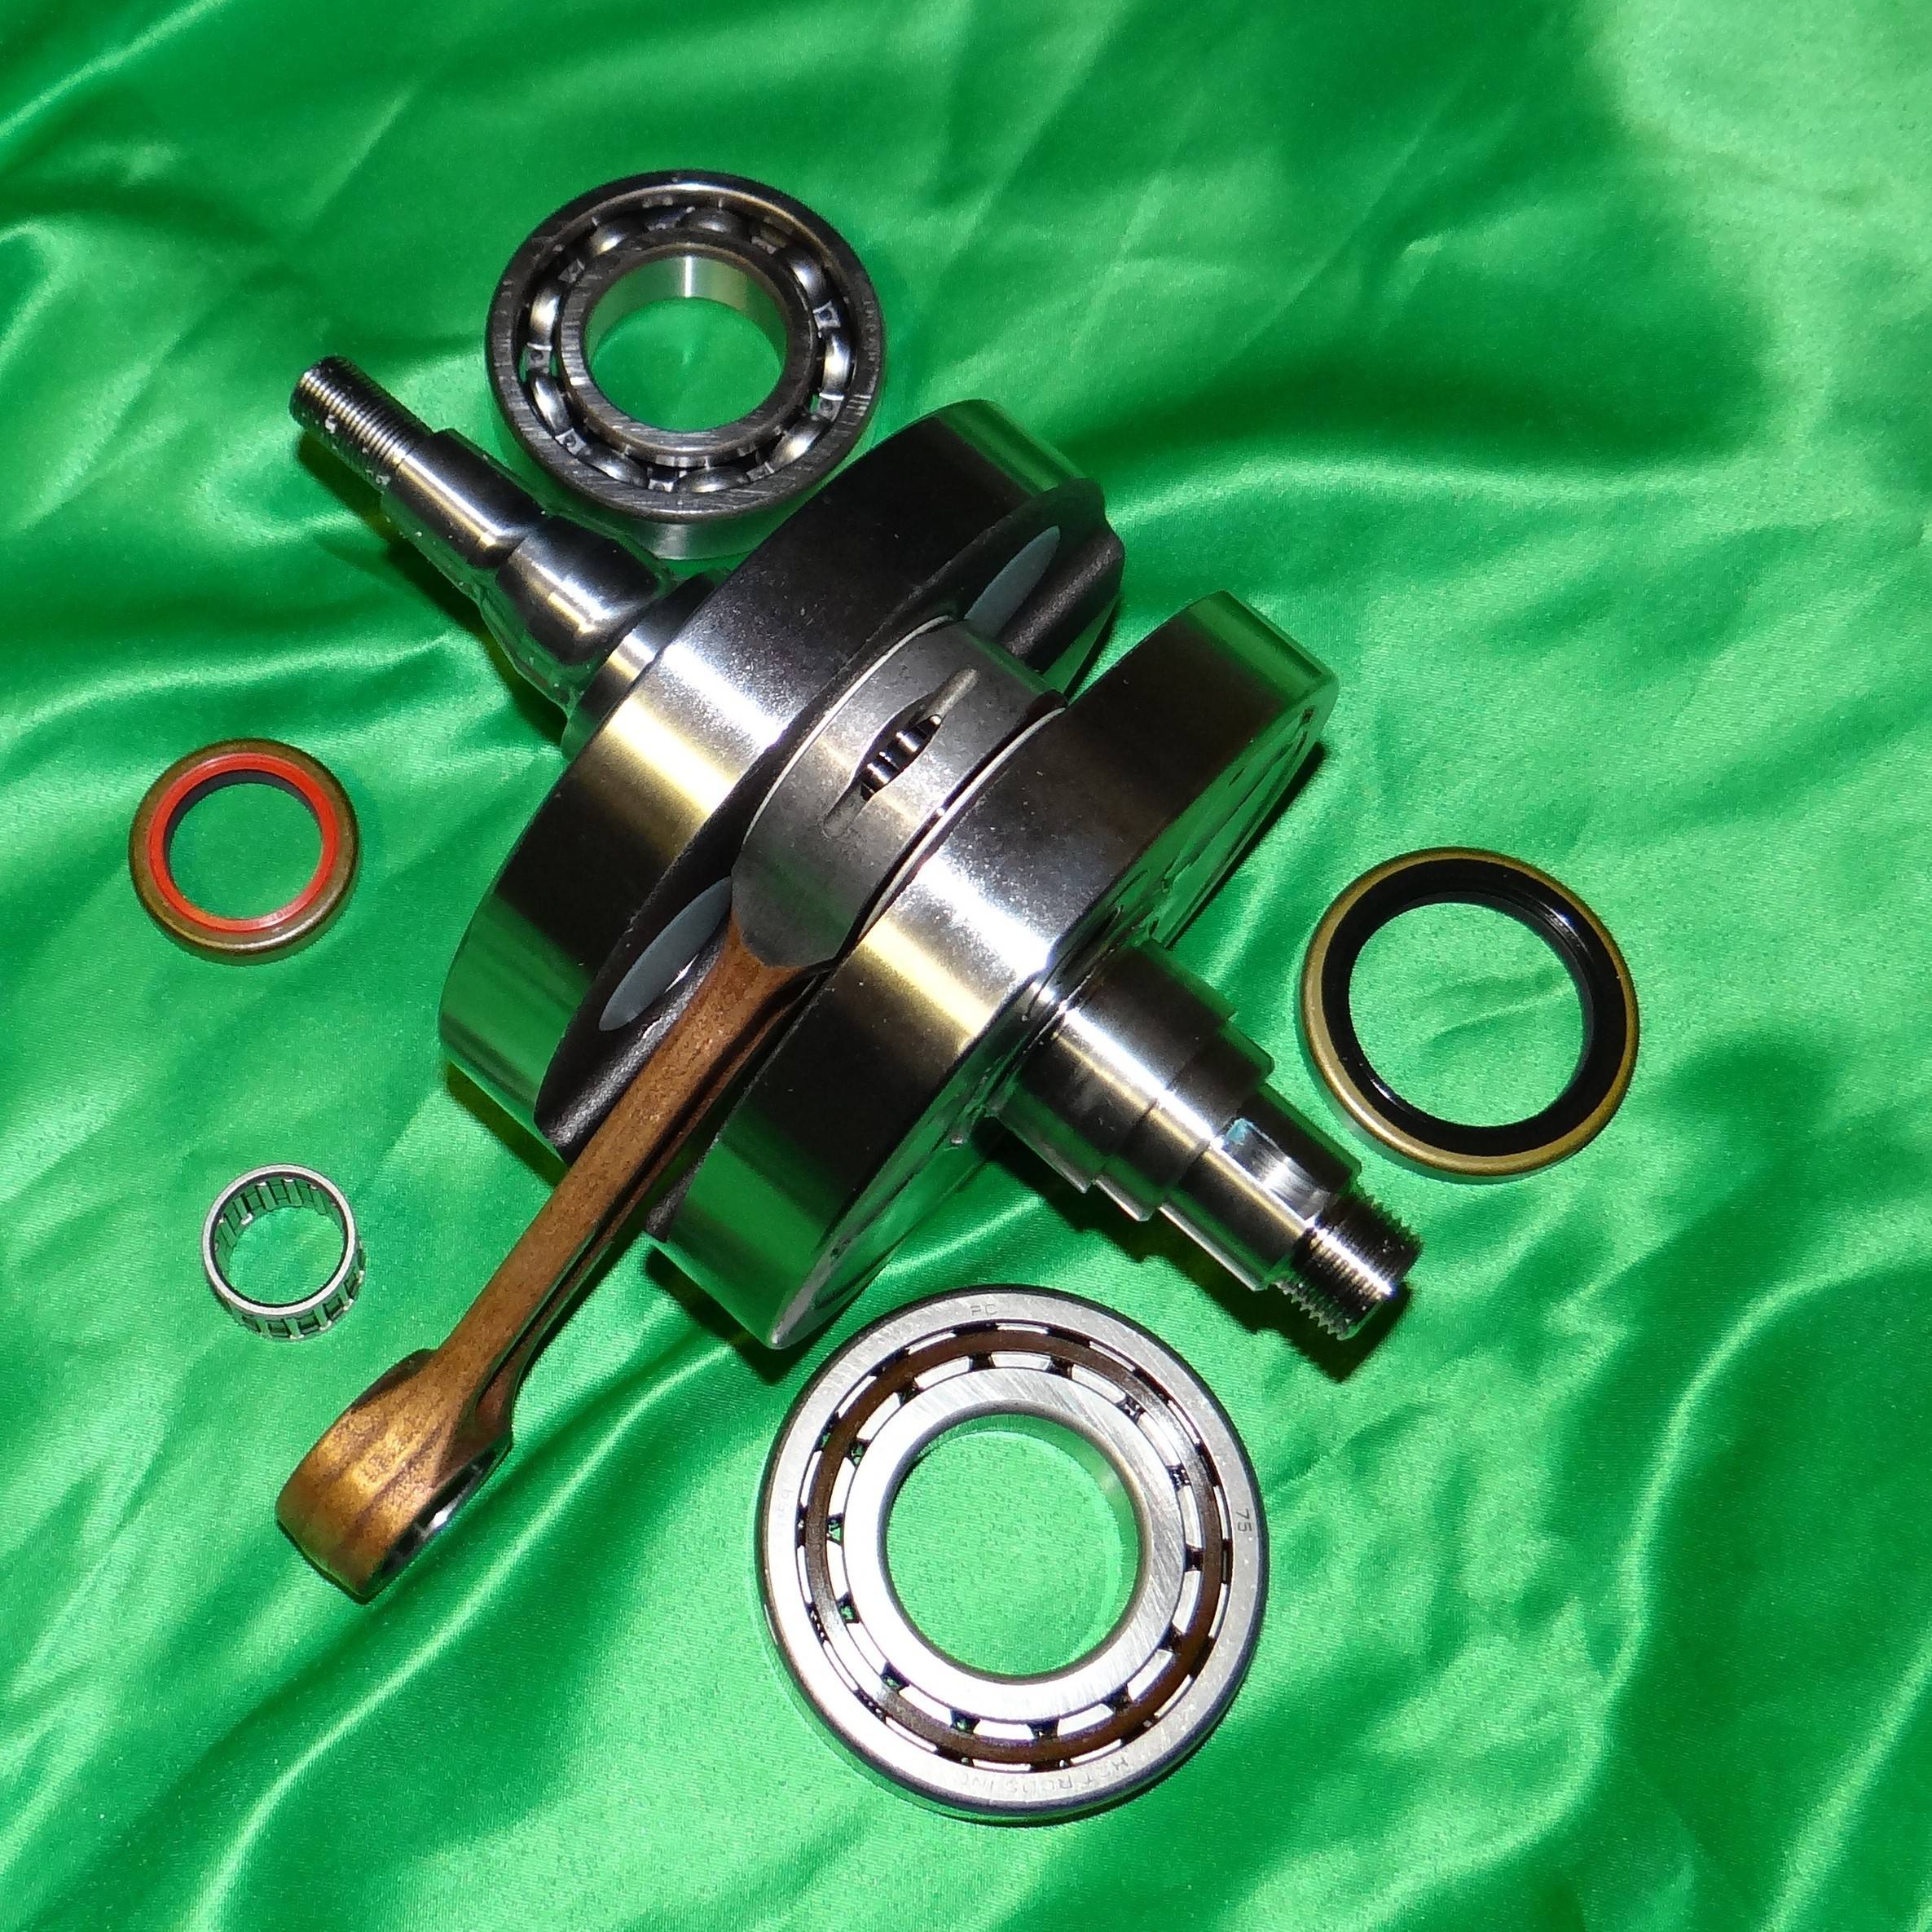 Crankshaft, crankcase, bearing, connecting rod and needle cage for HUSABERG 2 strokes